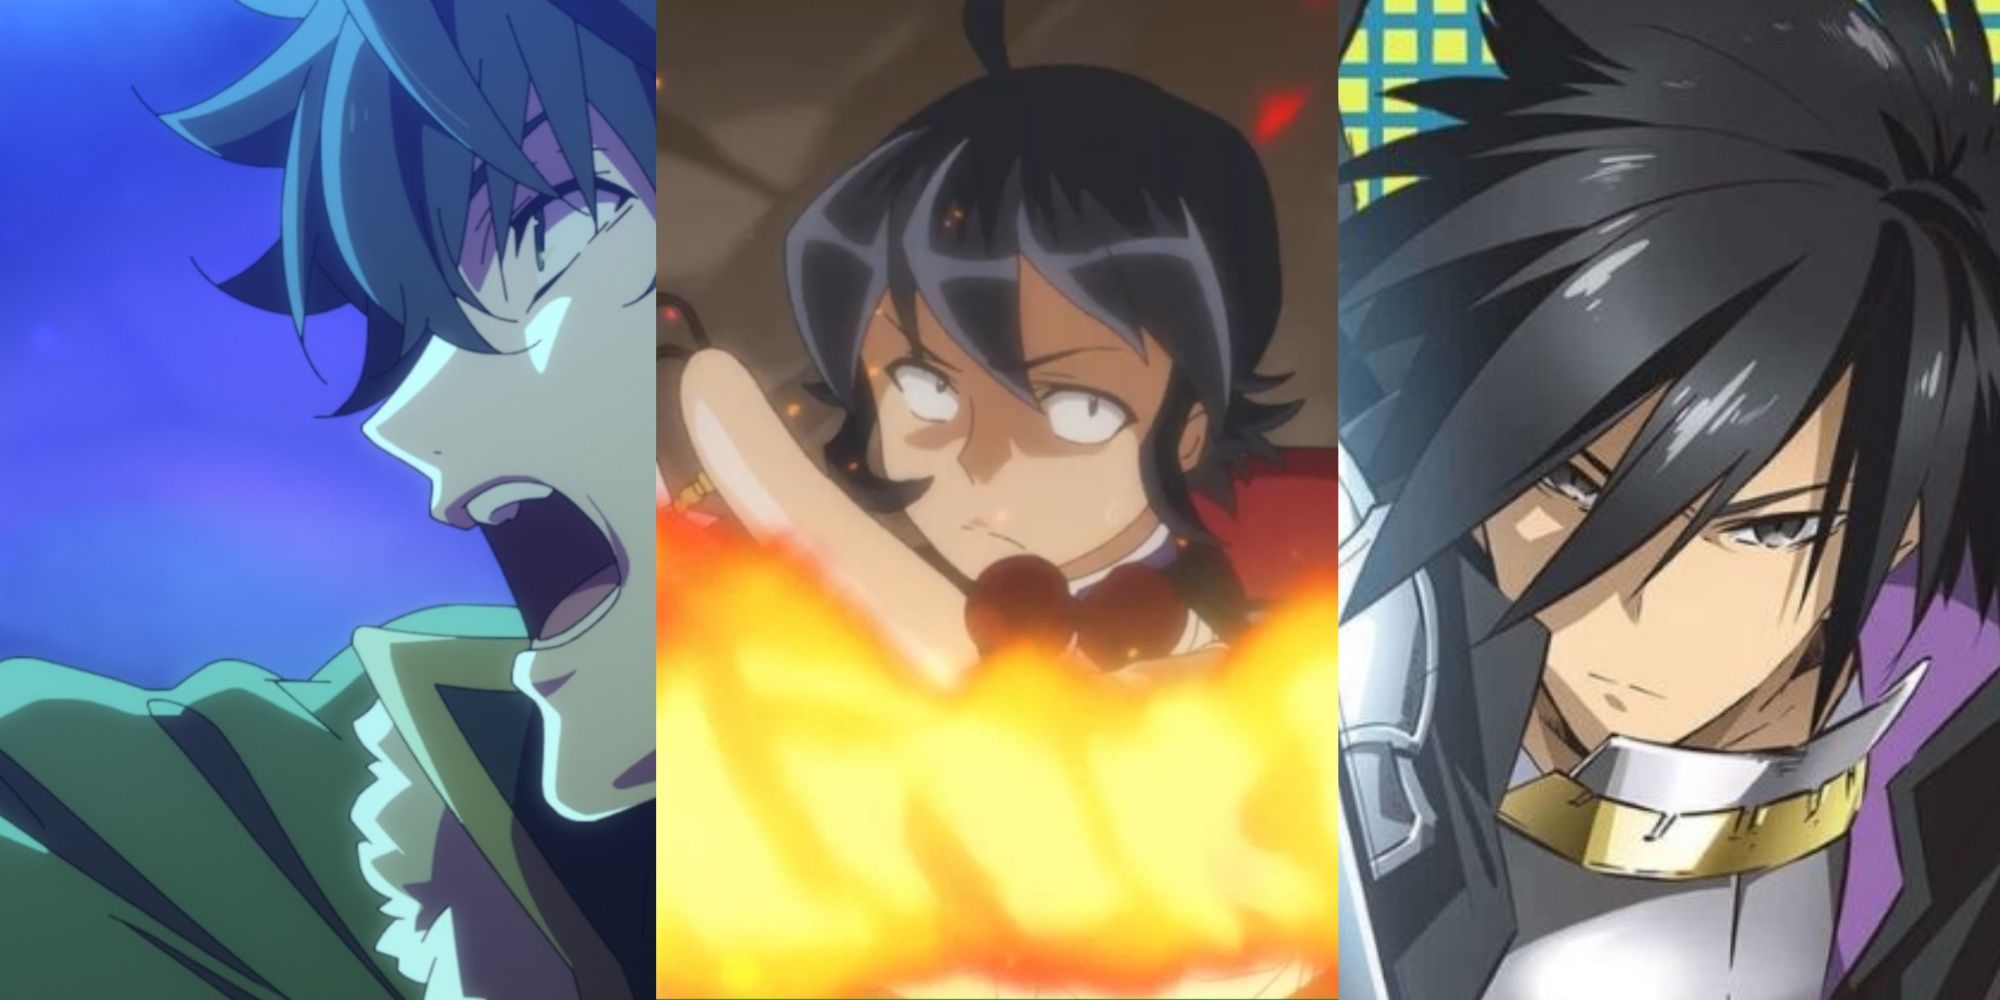 Naofumi, Kuzunoha, and Seiya, protagonists from Isekai anime who went too far in order to survive or save others